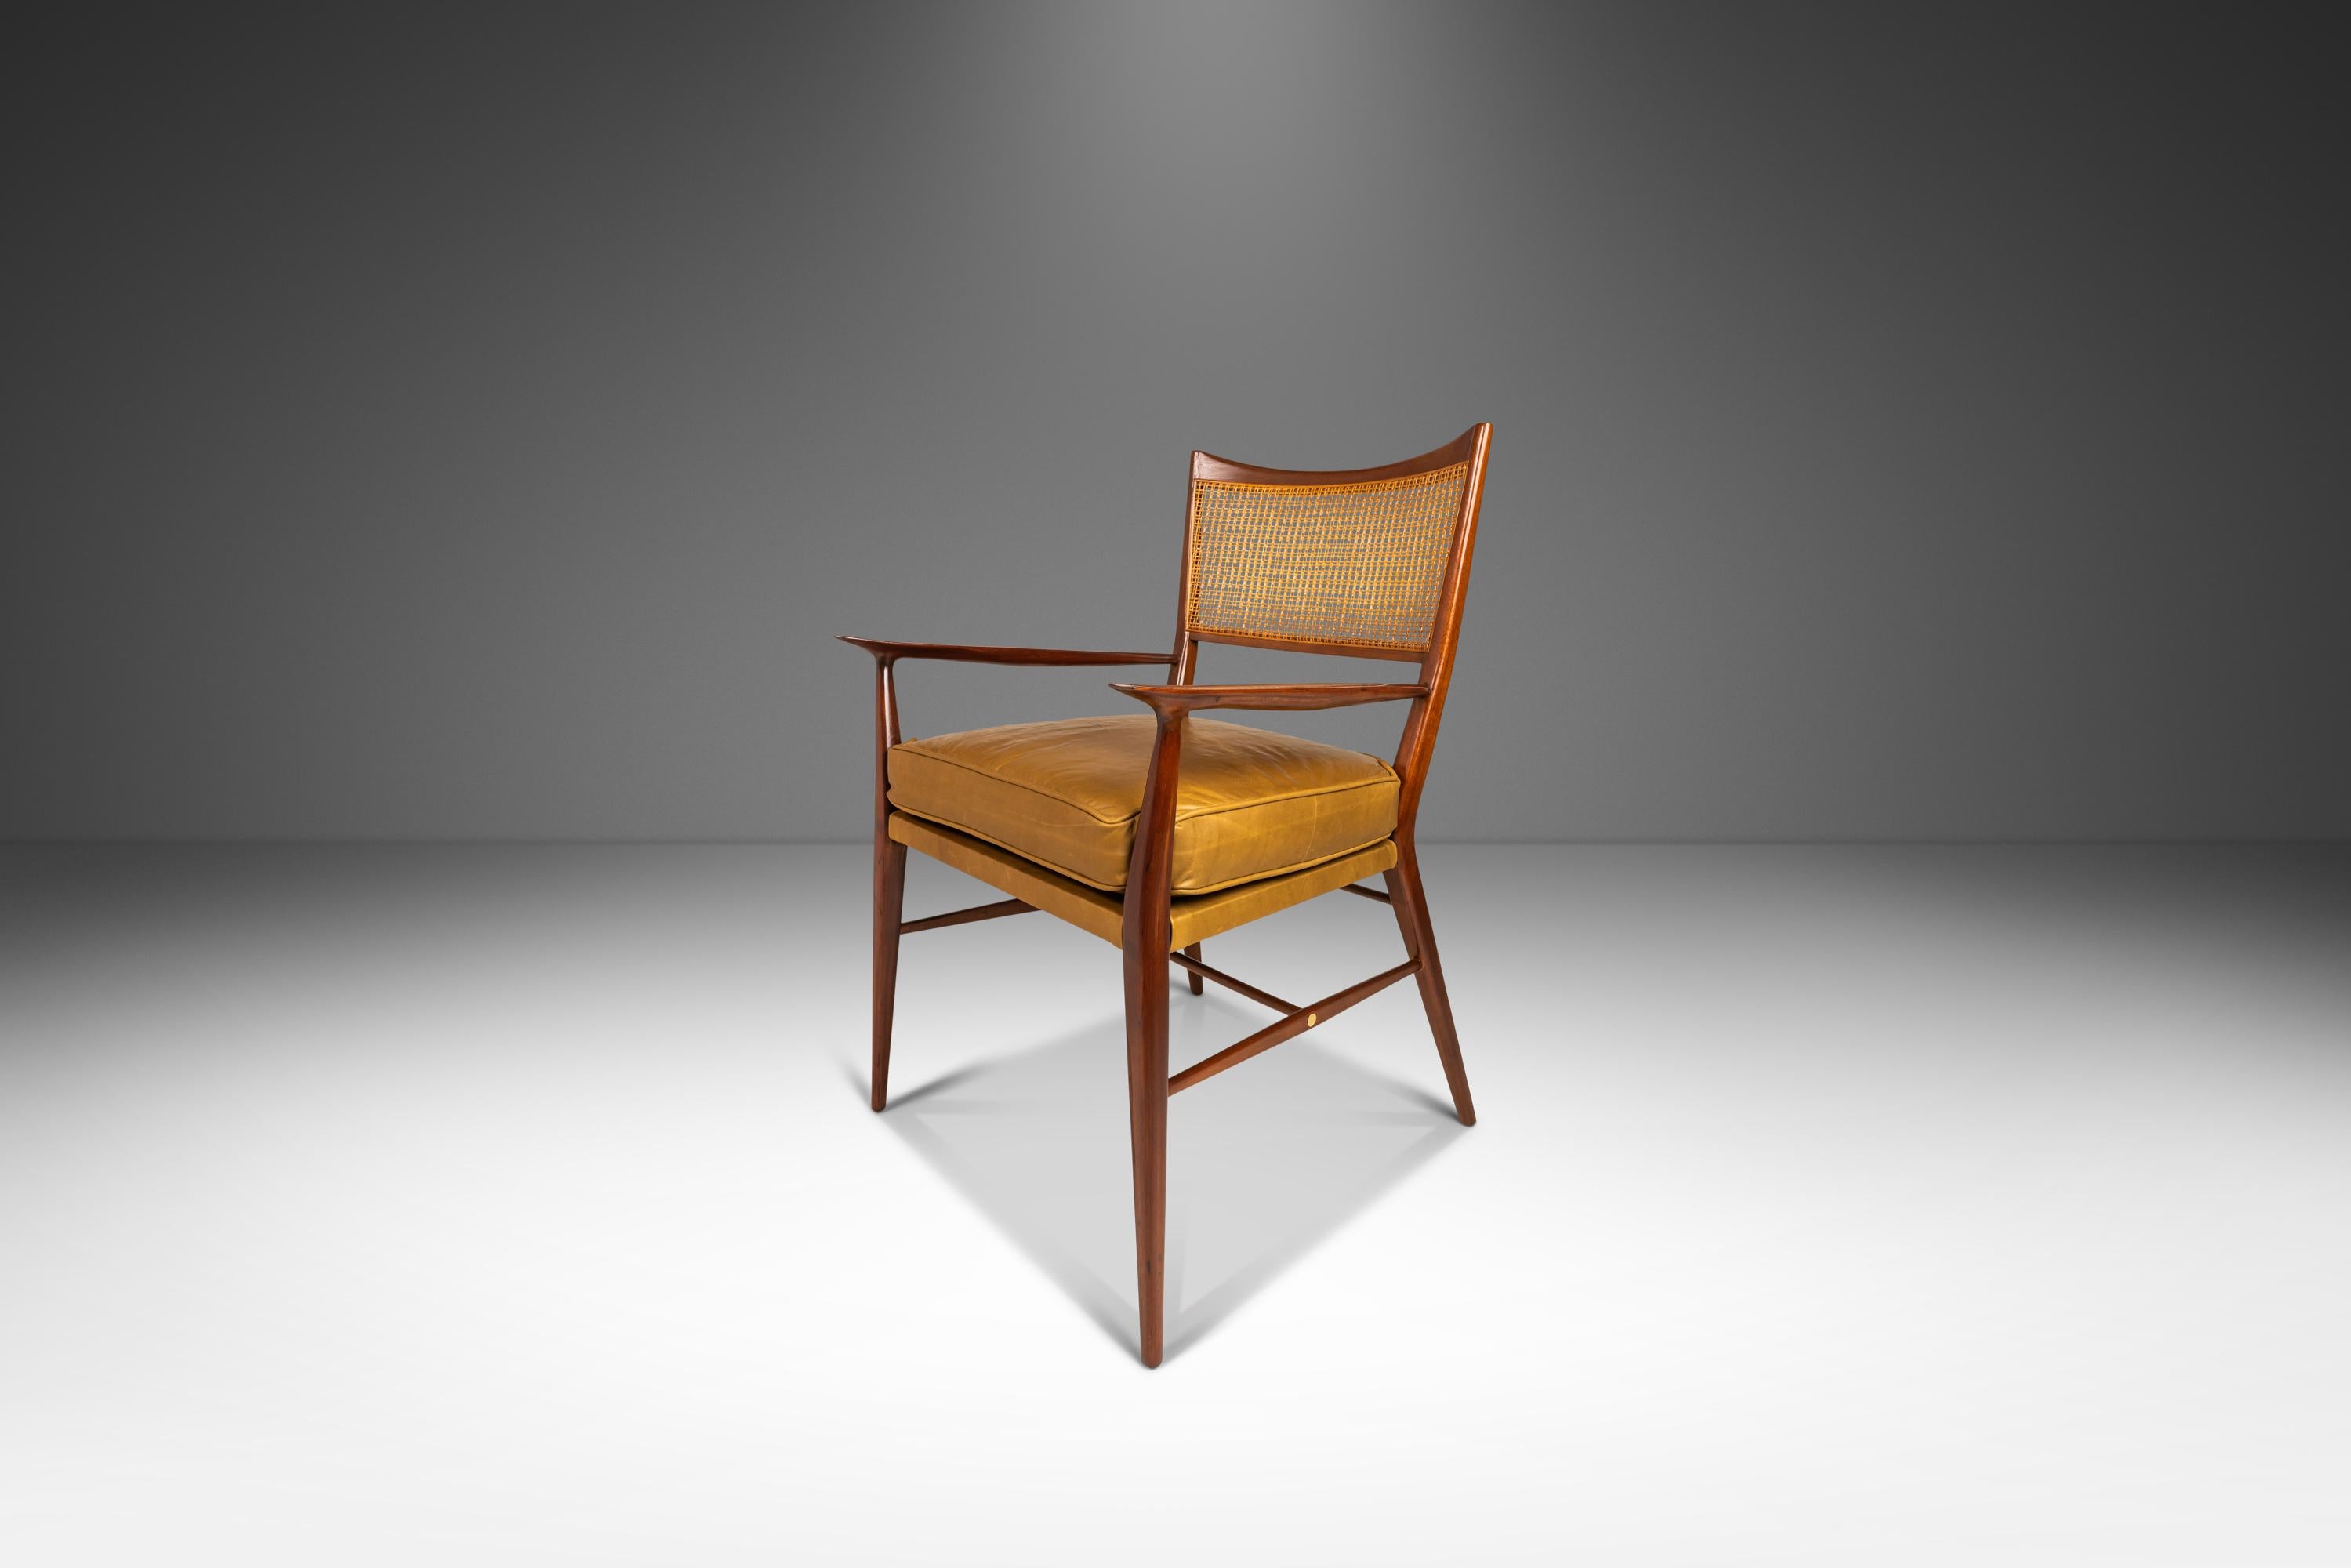 Mid-20th Century MCM Model 7001 Chair in Walnut by Paul McCobb for Directional, USA, c. 1950s For Sale